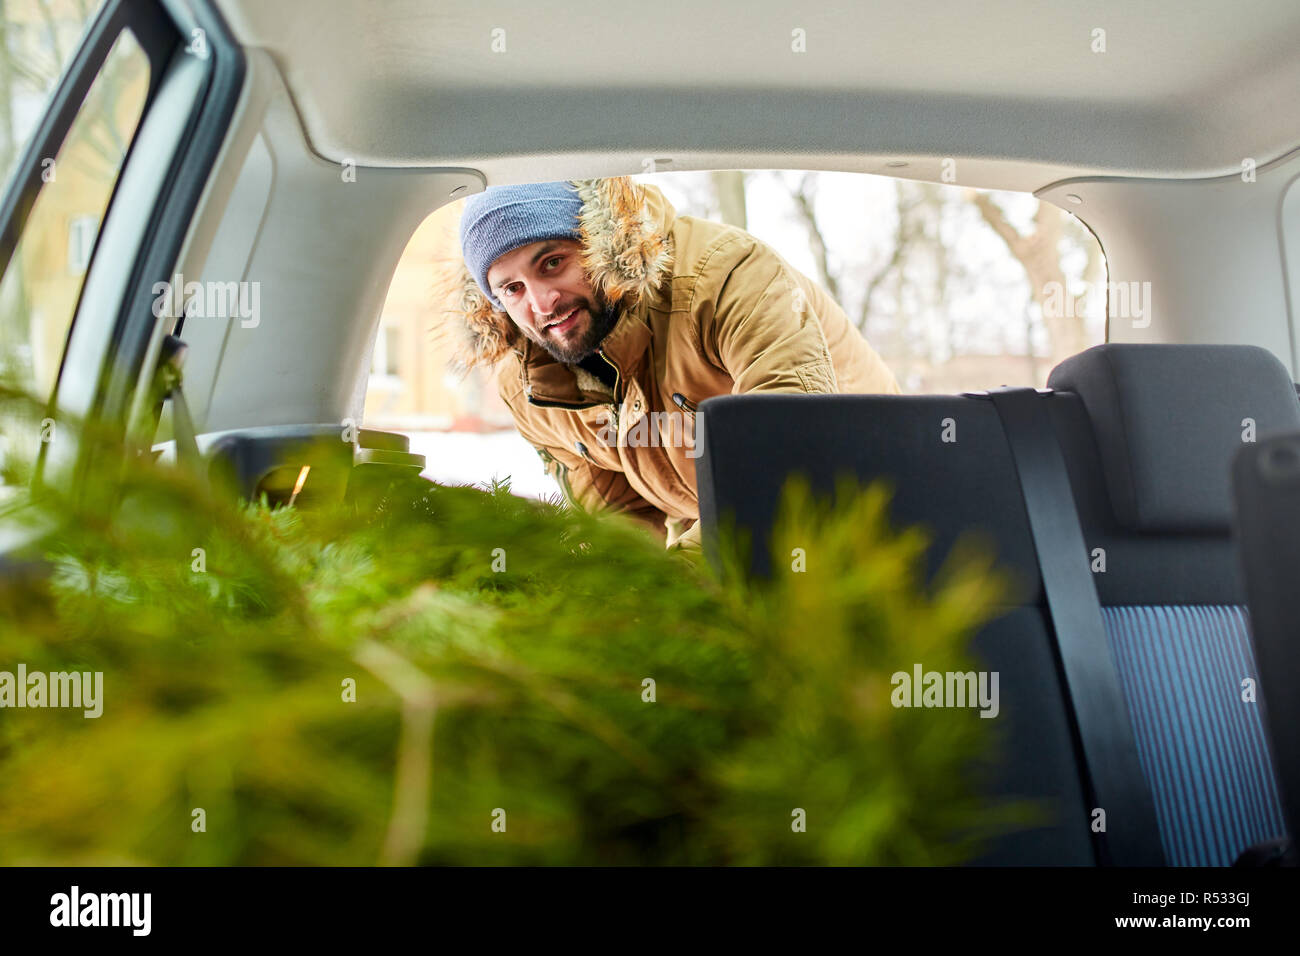 Bearded man unloading christmas tree out of trunk of his car, inside view. Hipster gets fir tree from the back of his hatchback. Convertible auto interior with practical folding seats for boot space. Stock Photo